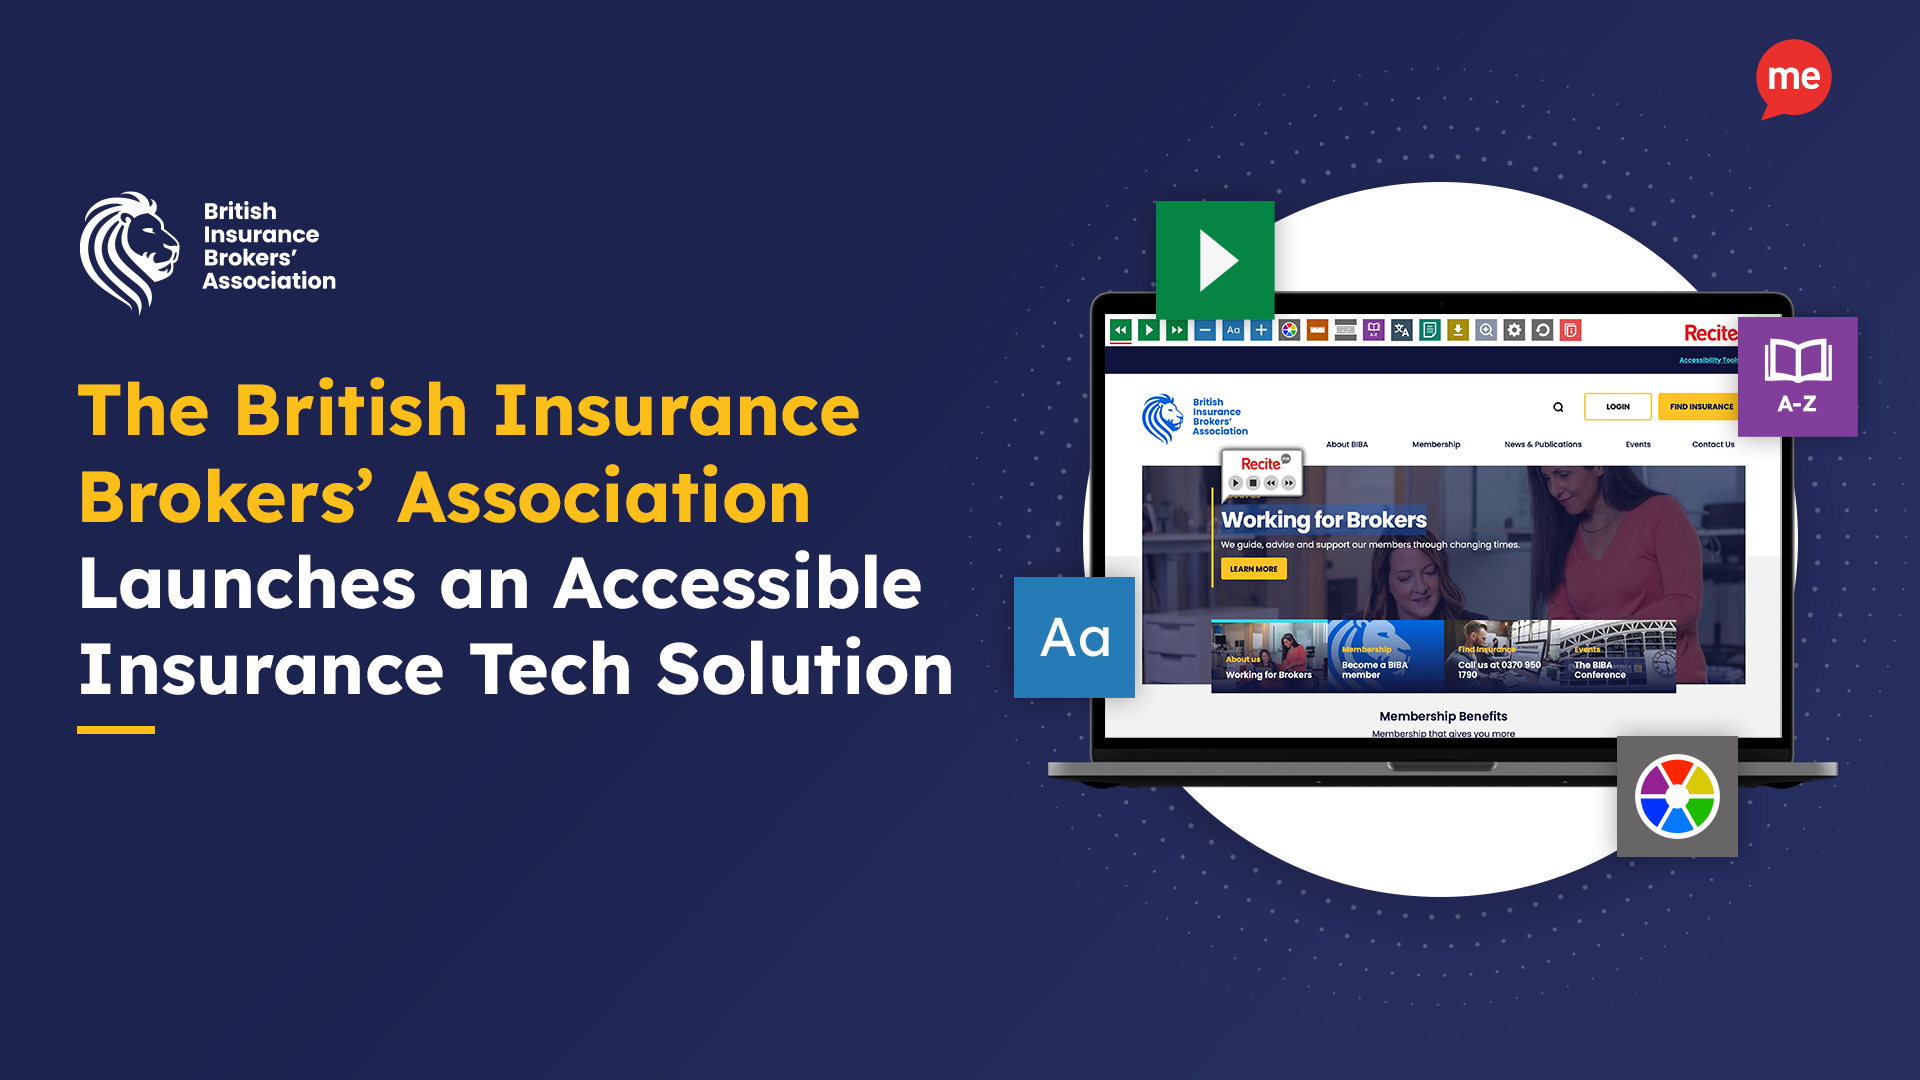 The British Insurance Brokers' Association Launches Accessible Insurance Tech Solution